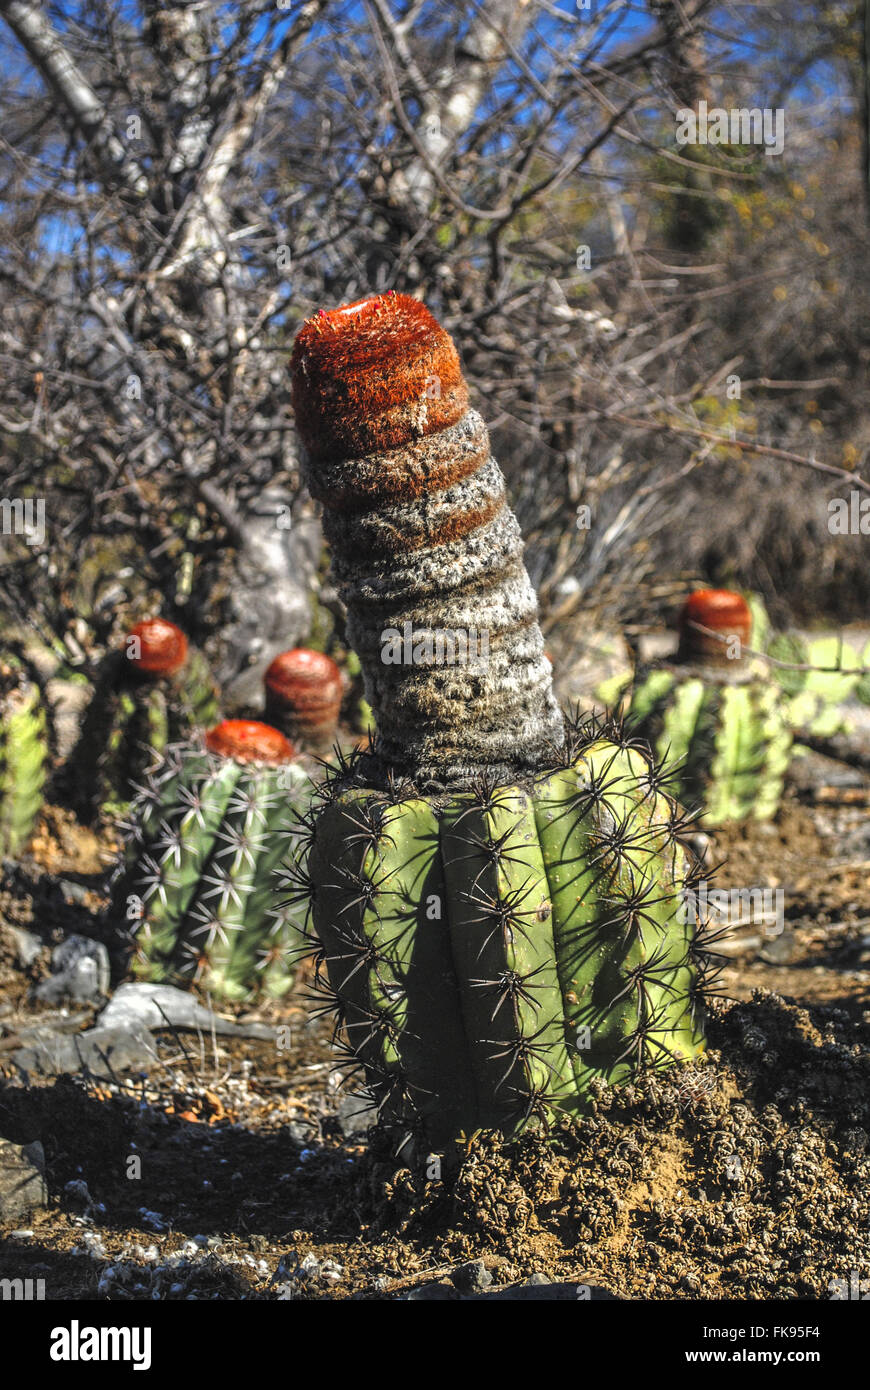 Cacti crown-of basking in the State Park Dry Forest Stock Photo